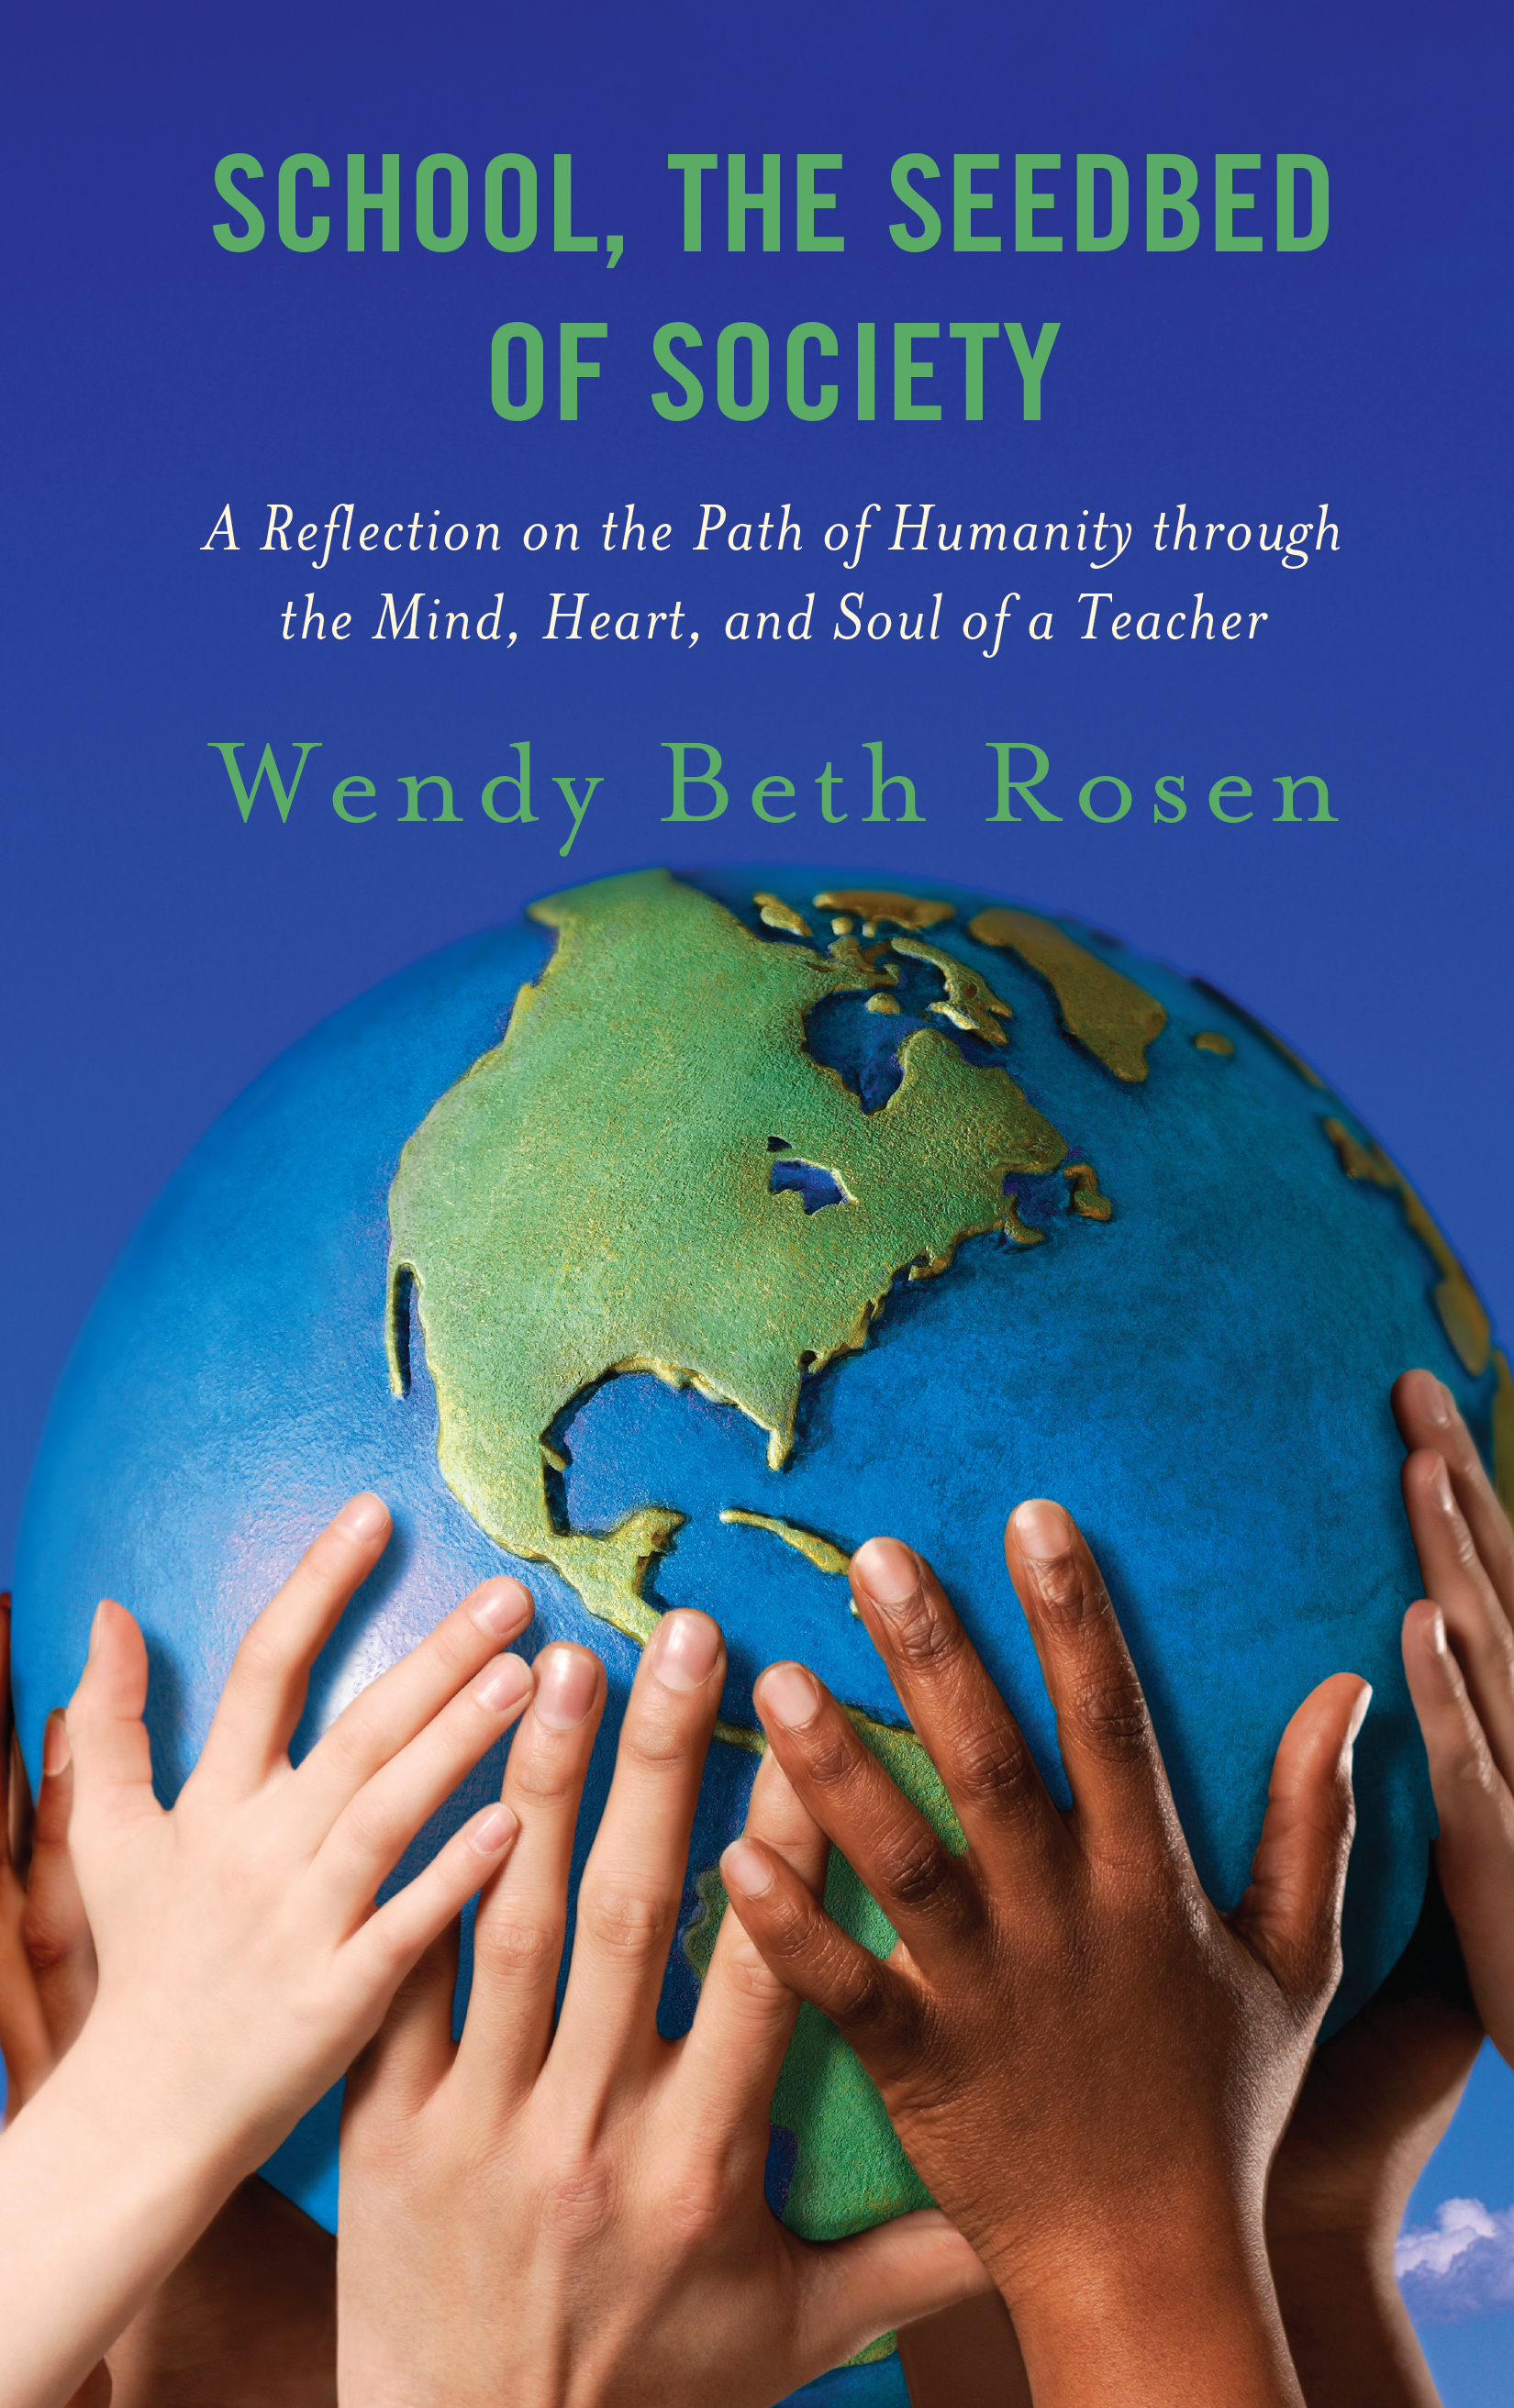 School, The Seedbed of Society: A Reflection on the Path of Humanity through the Mind, Heart, and Soul of a Teacher